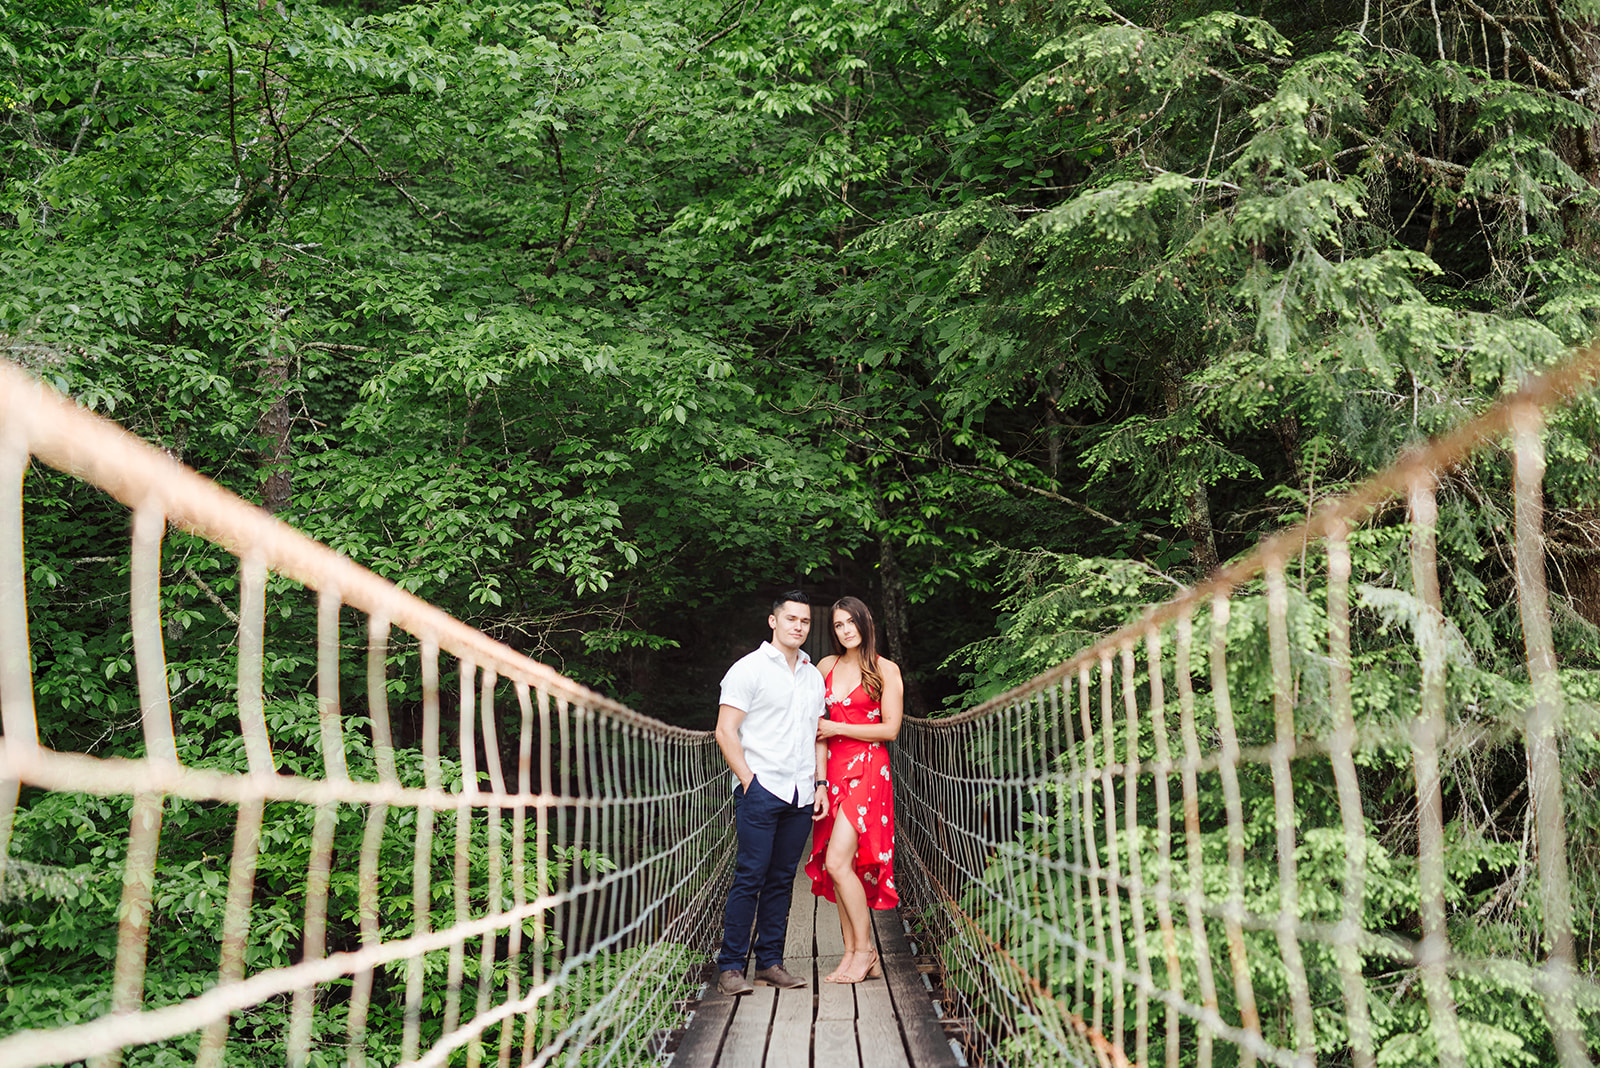 Fall Creek Falls engagement session captured by Sara Bill Photography